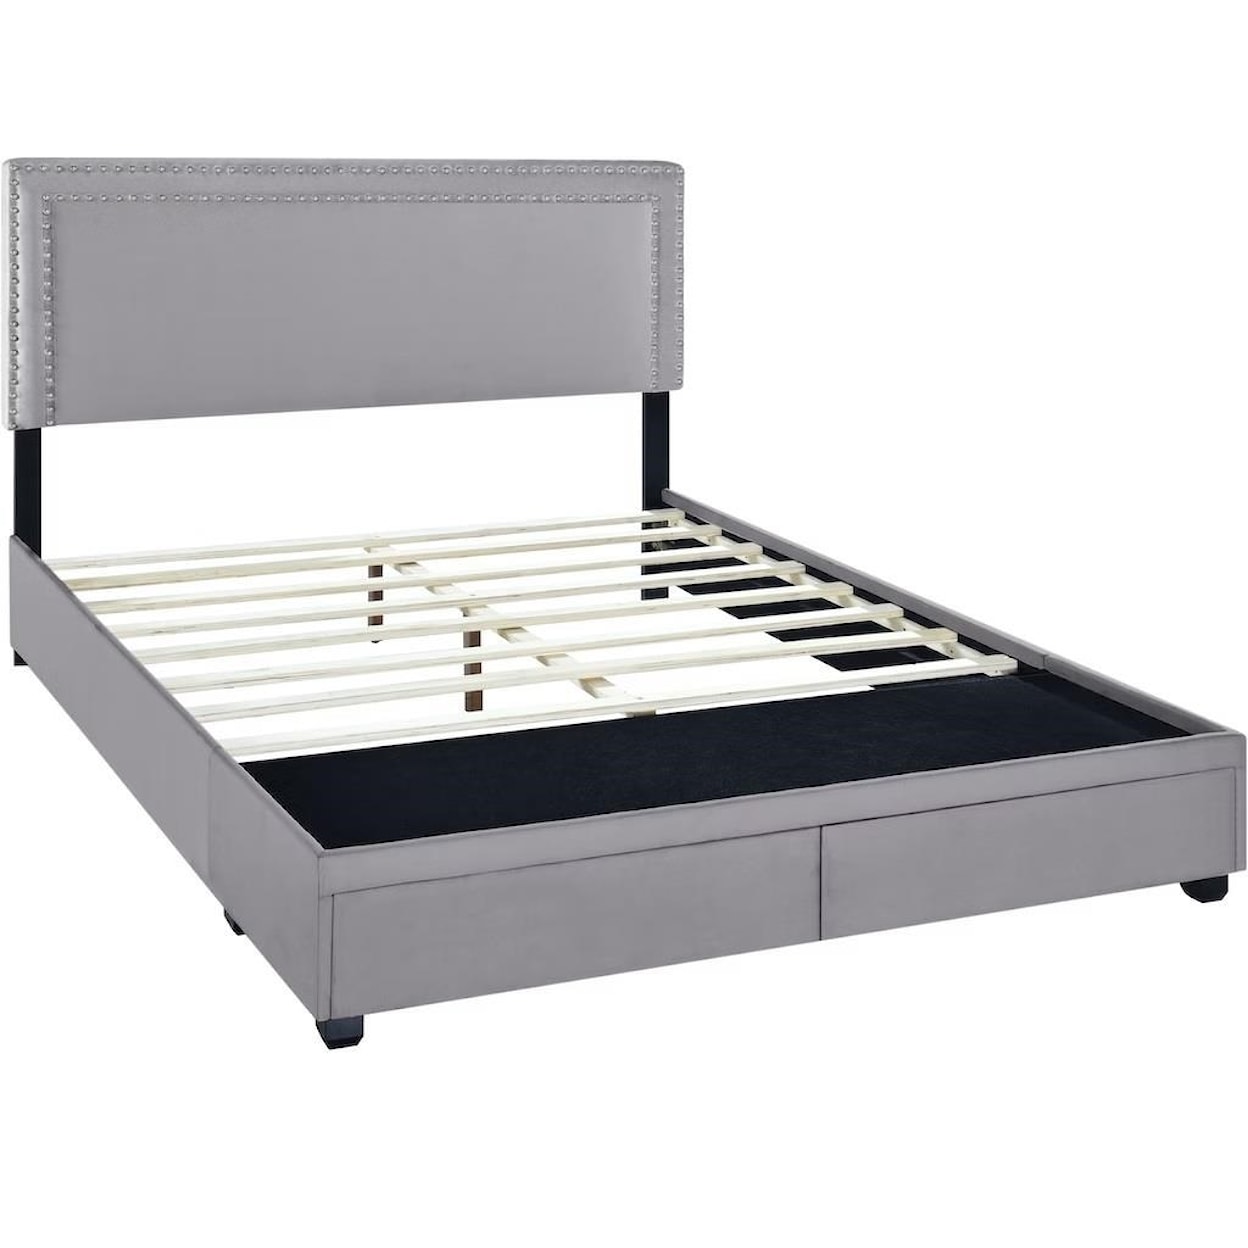 The Monday Company Upholstered Bedroom Queen Nail Trim Storage Bed